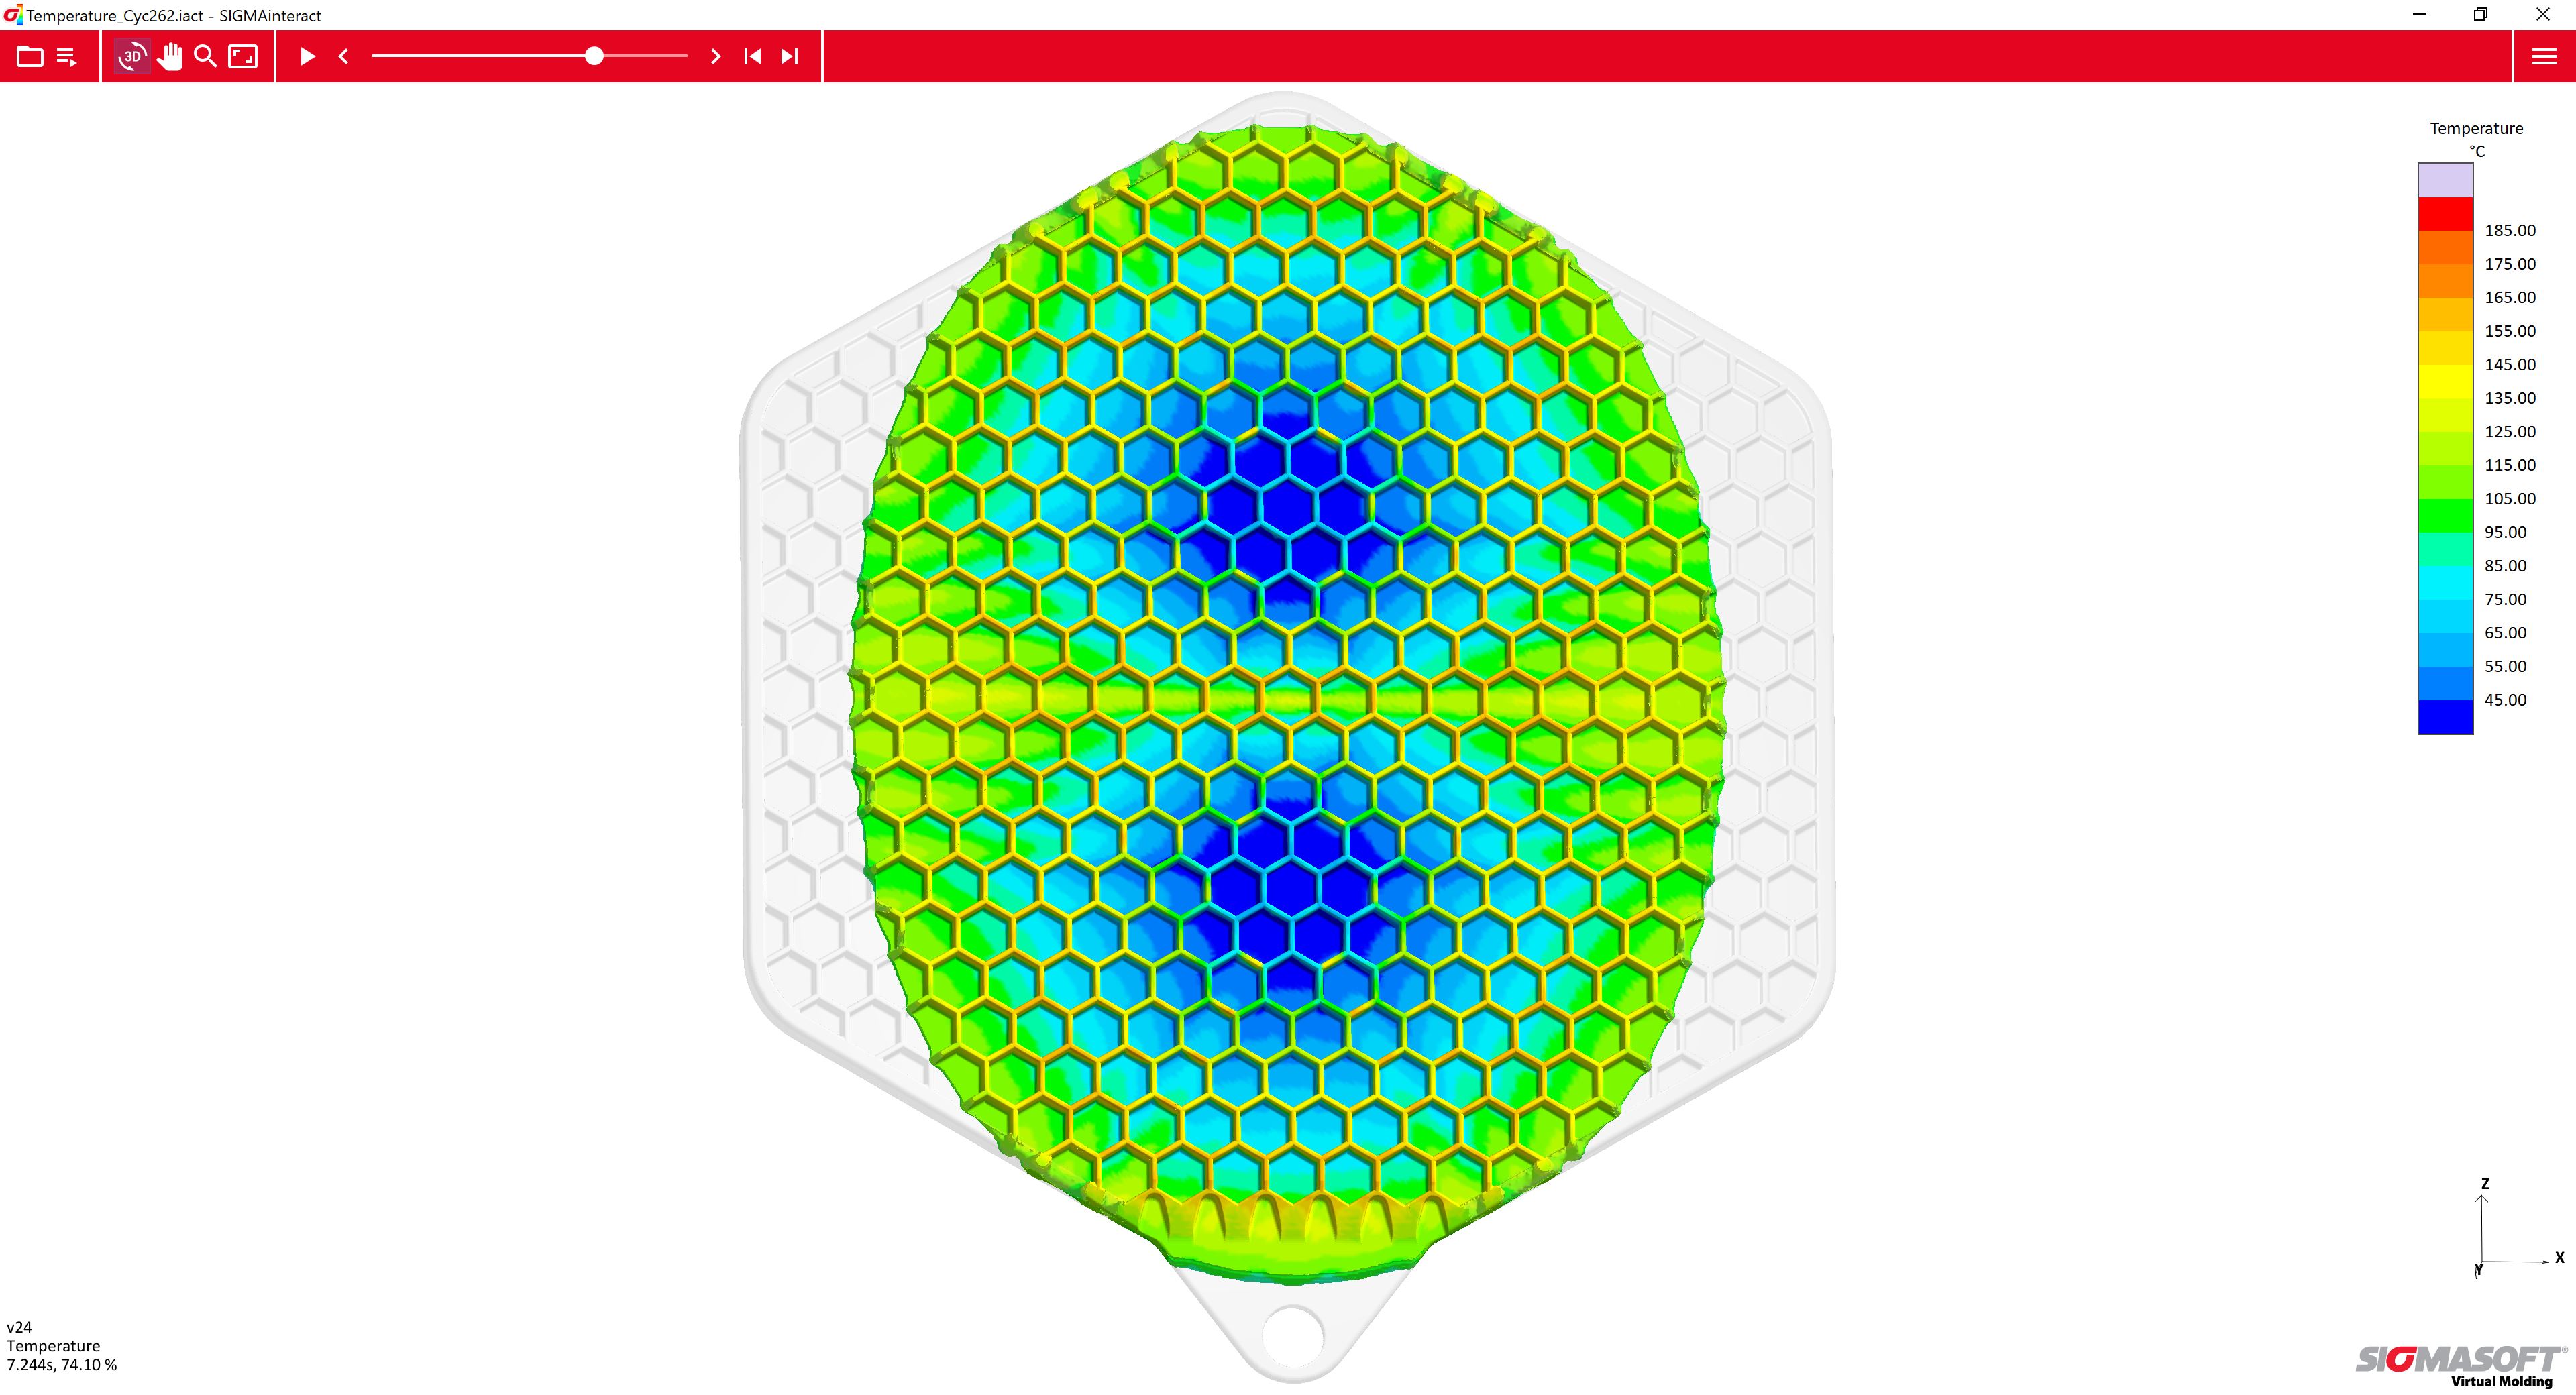 Temperature distribution in the part during filling, shown on an interactive 3D model at 74% filled.